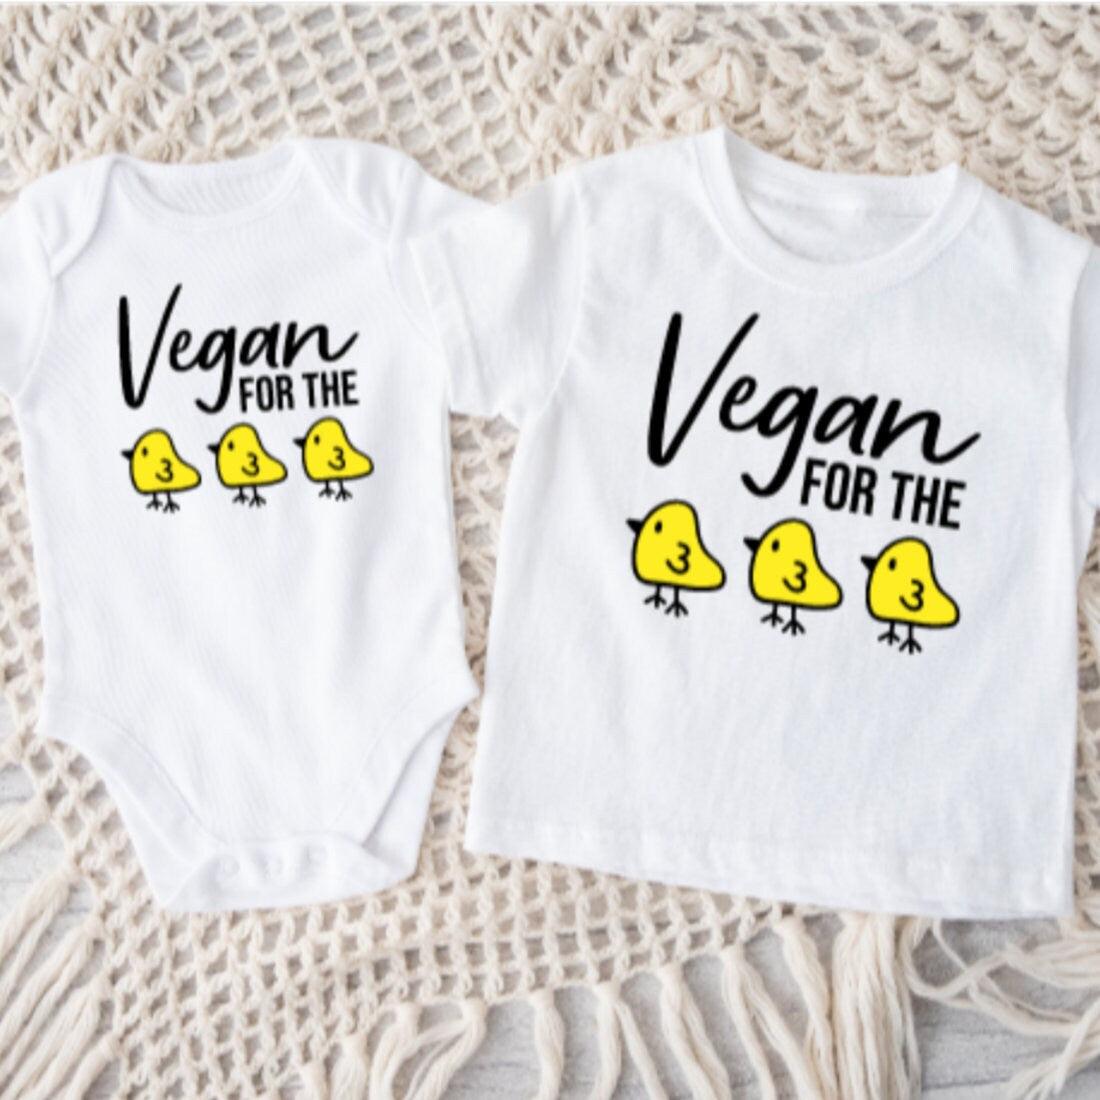 Vegan Daddy and Me Gift Set - Vegan for the Chicks Father's Day Gift - Daddy and Son Matching Set - Gift for Vegan Family - Toddler and Dad